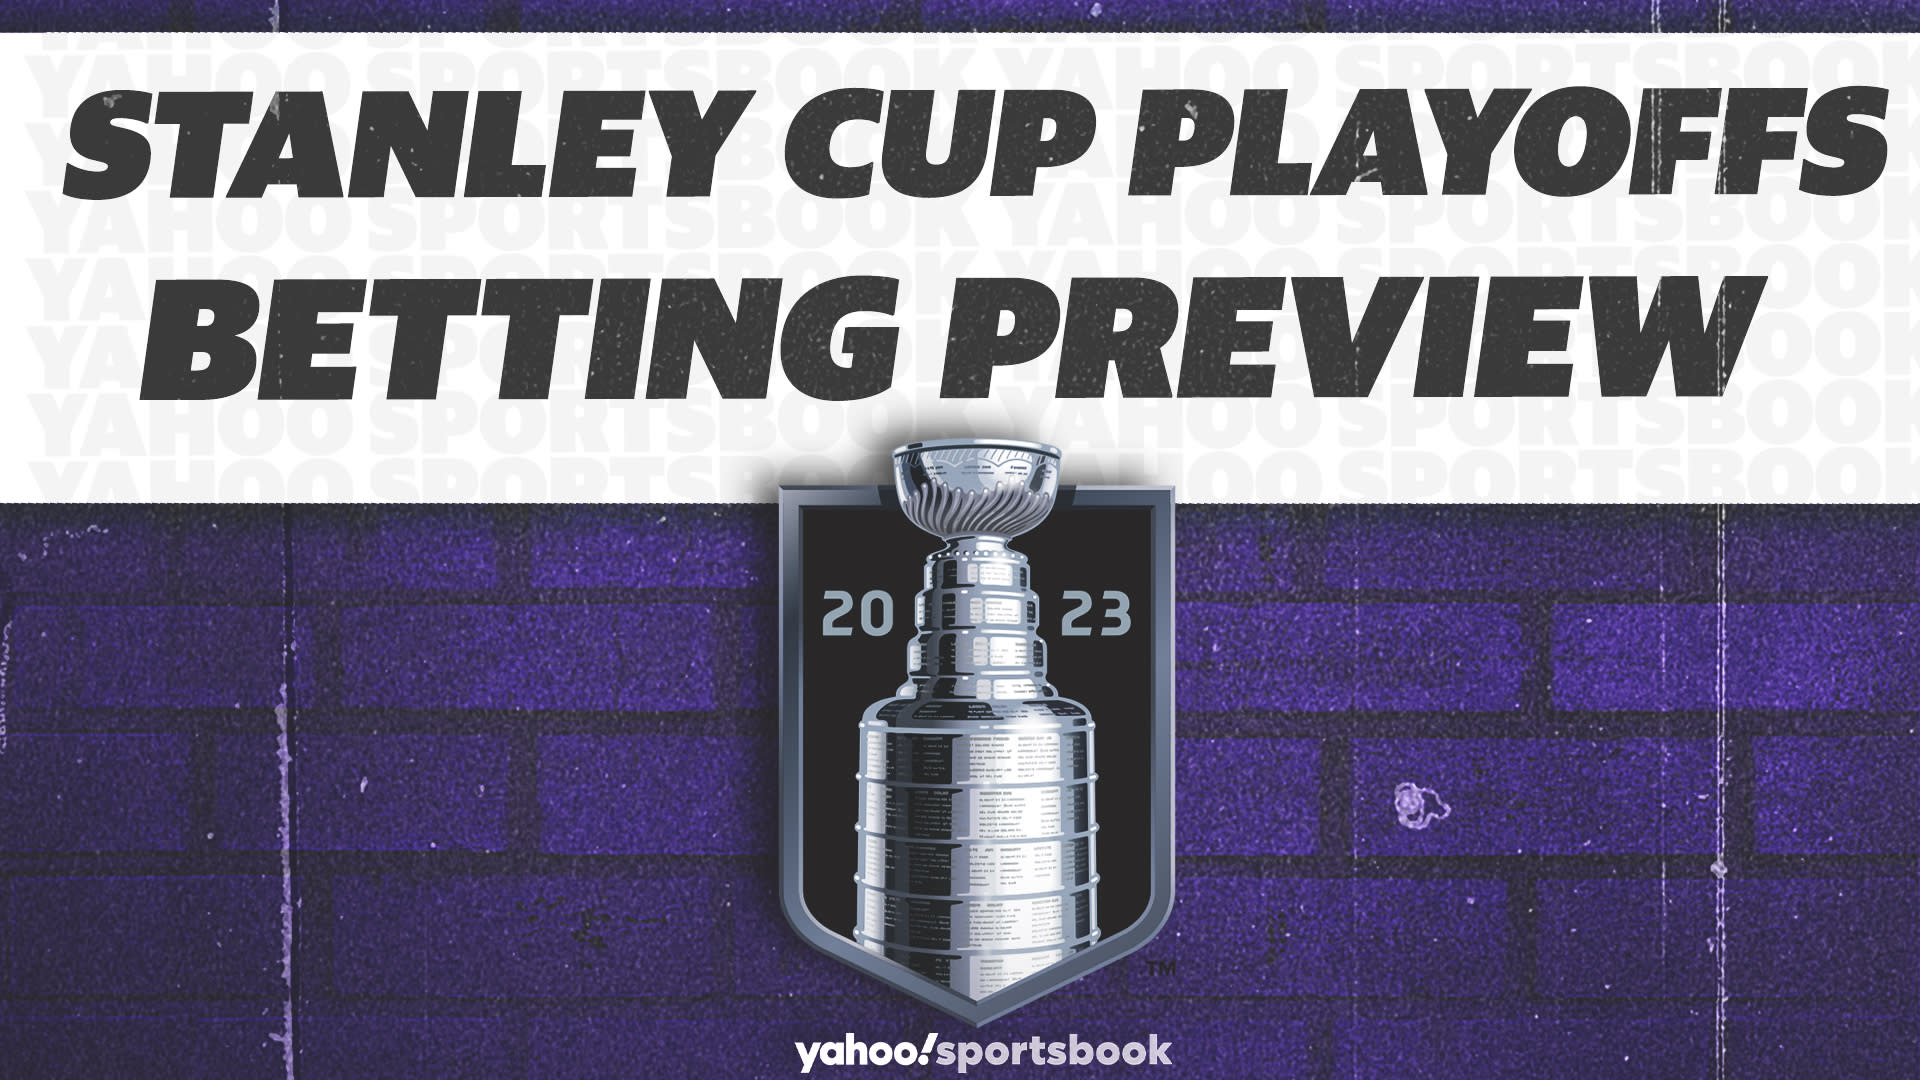 Betting Will Bruins win the Stanley Cup?